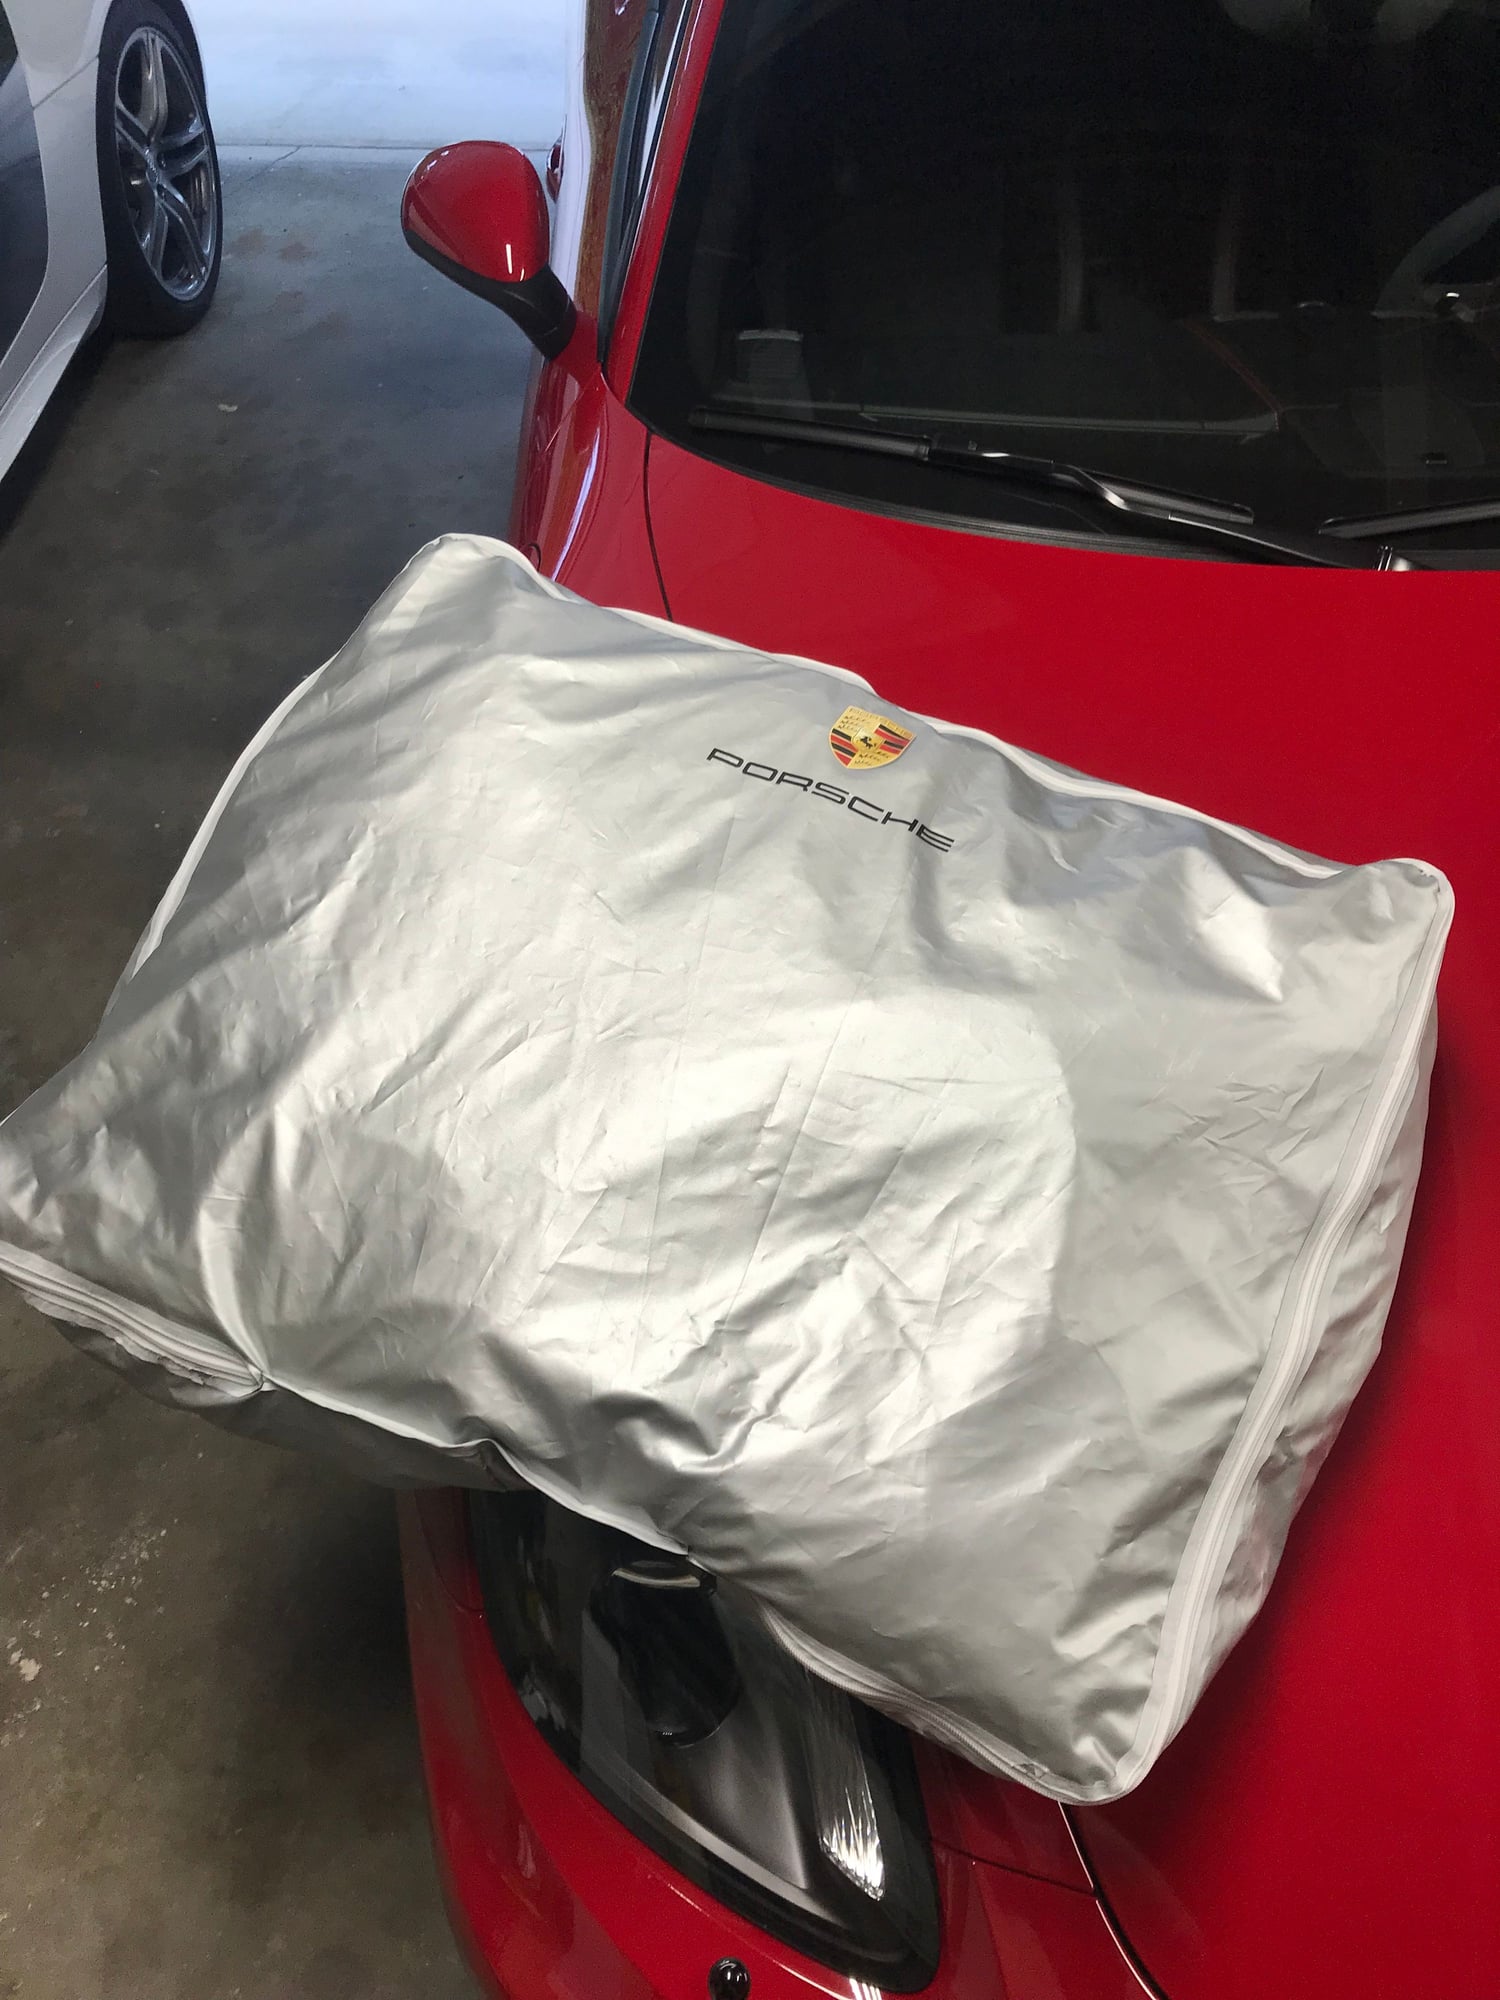 981 Boxster/Cayman Outdoor/Indoor OEM Car Cover $200 Shipped OBO